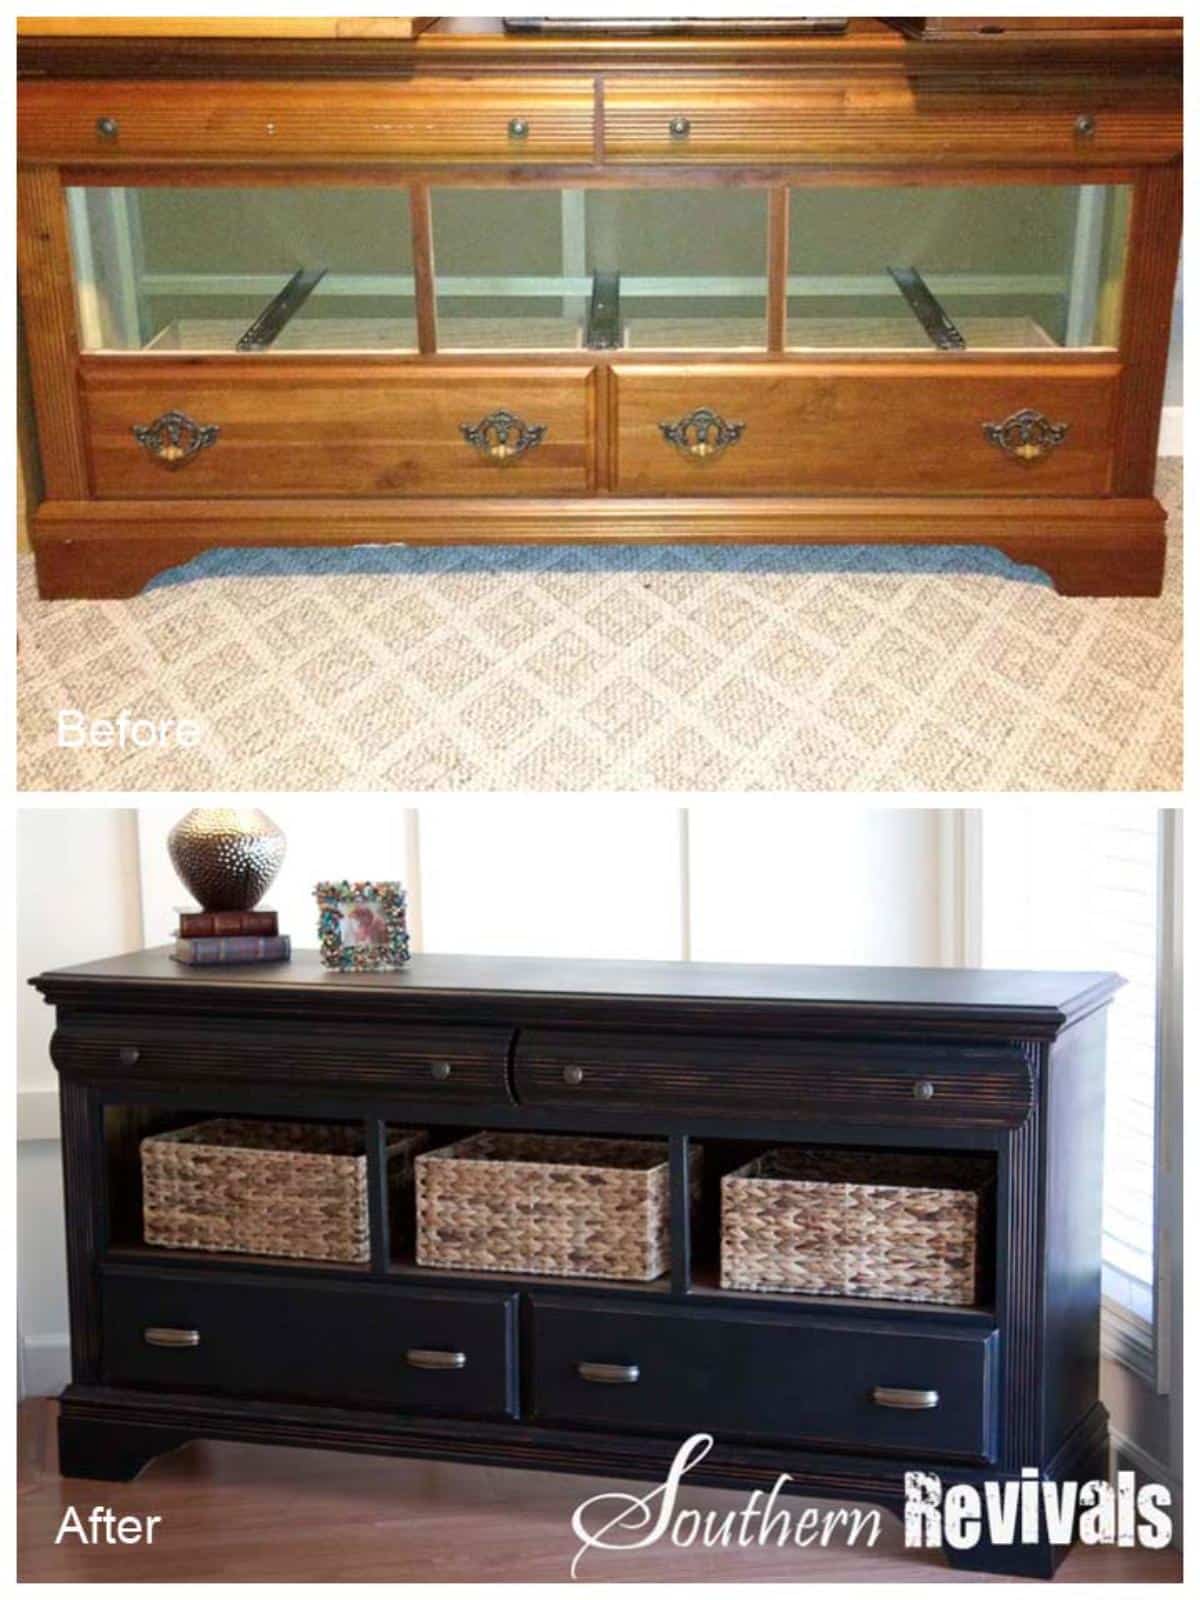 DIY Pottery Barn Style Dresser Revival before and after.